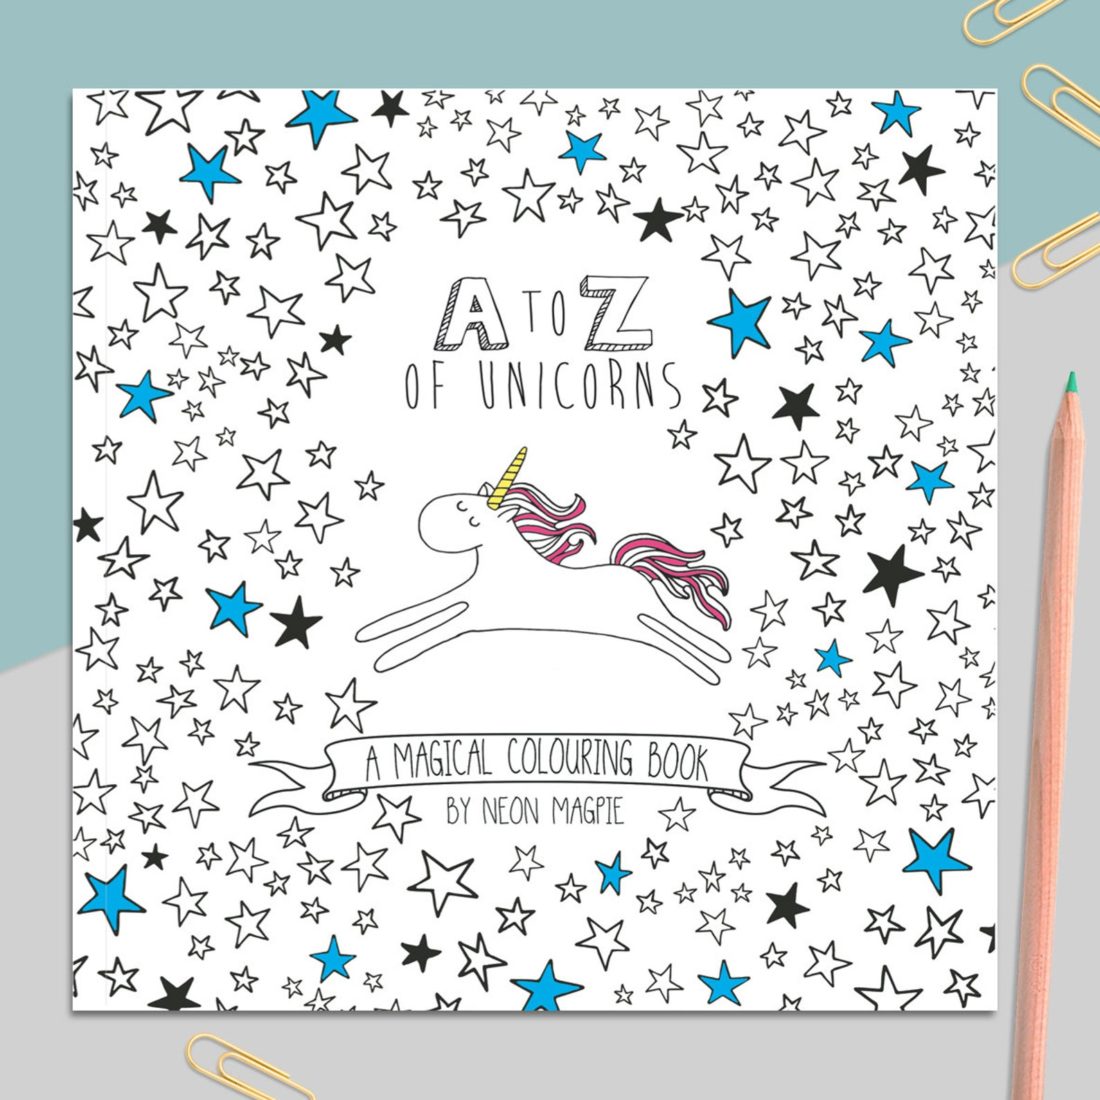 Unicorn colouring in book from Etsy